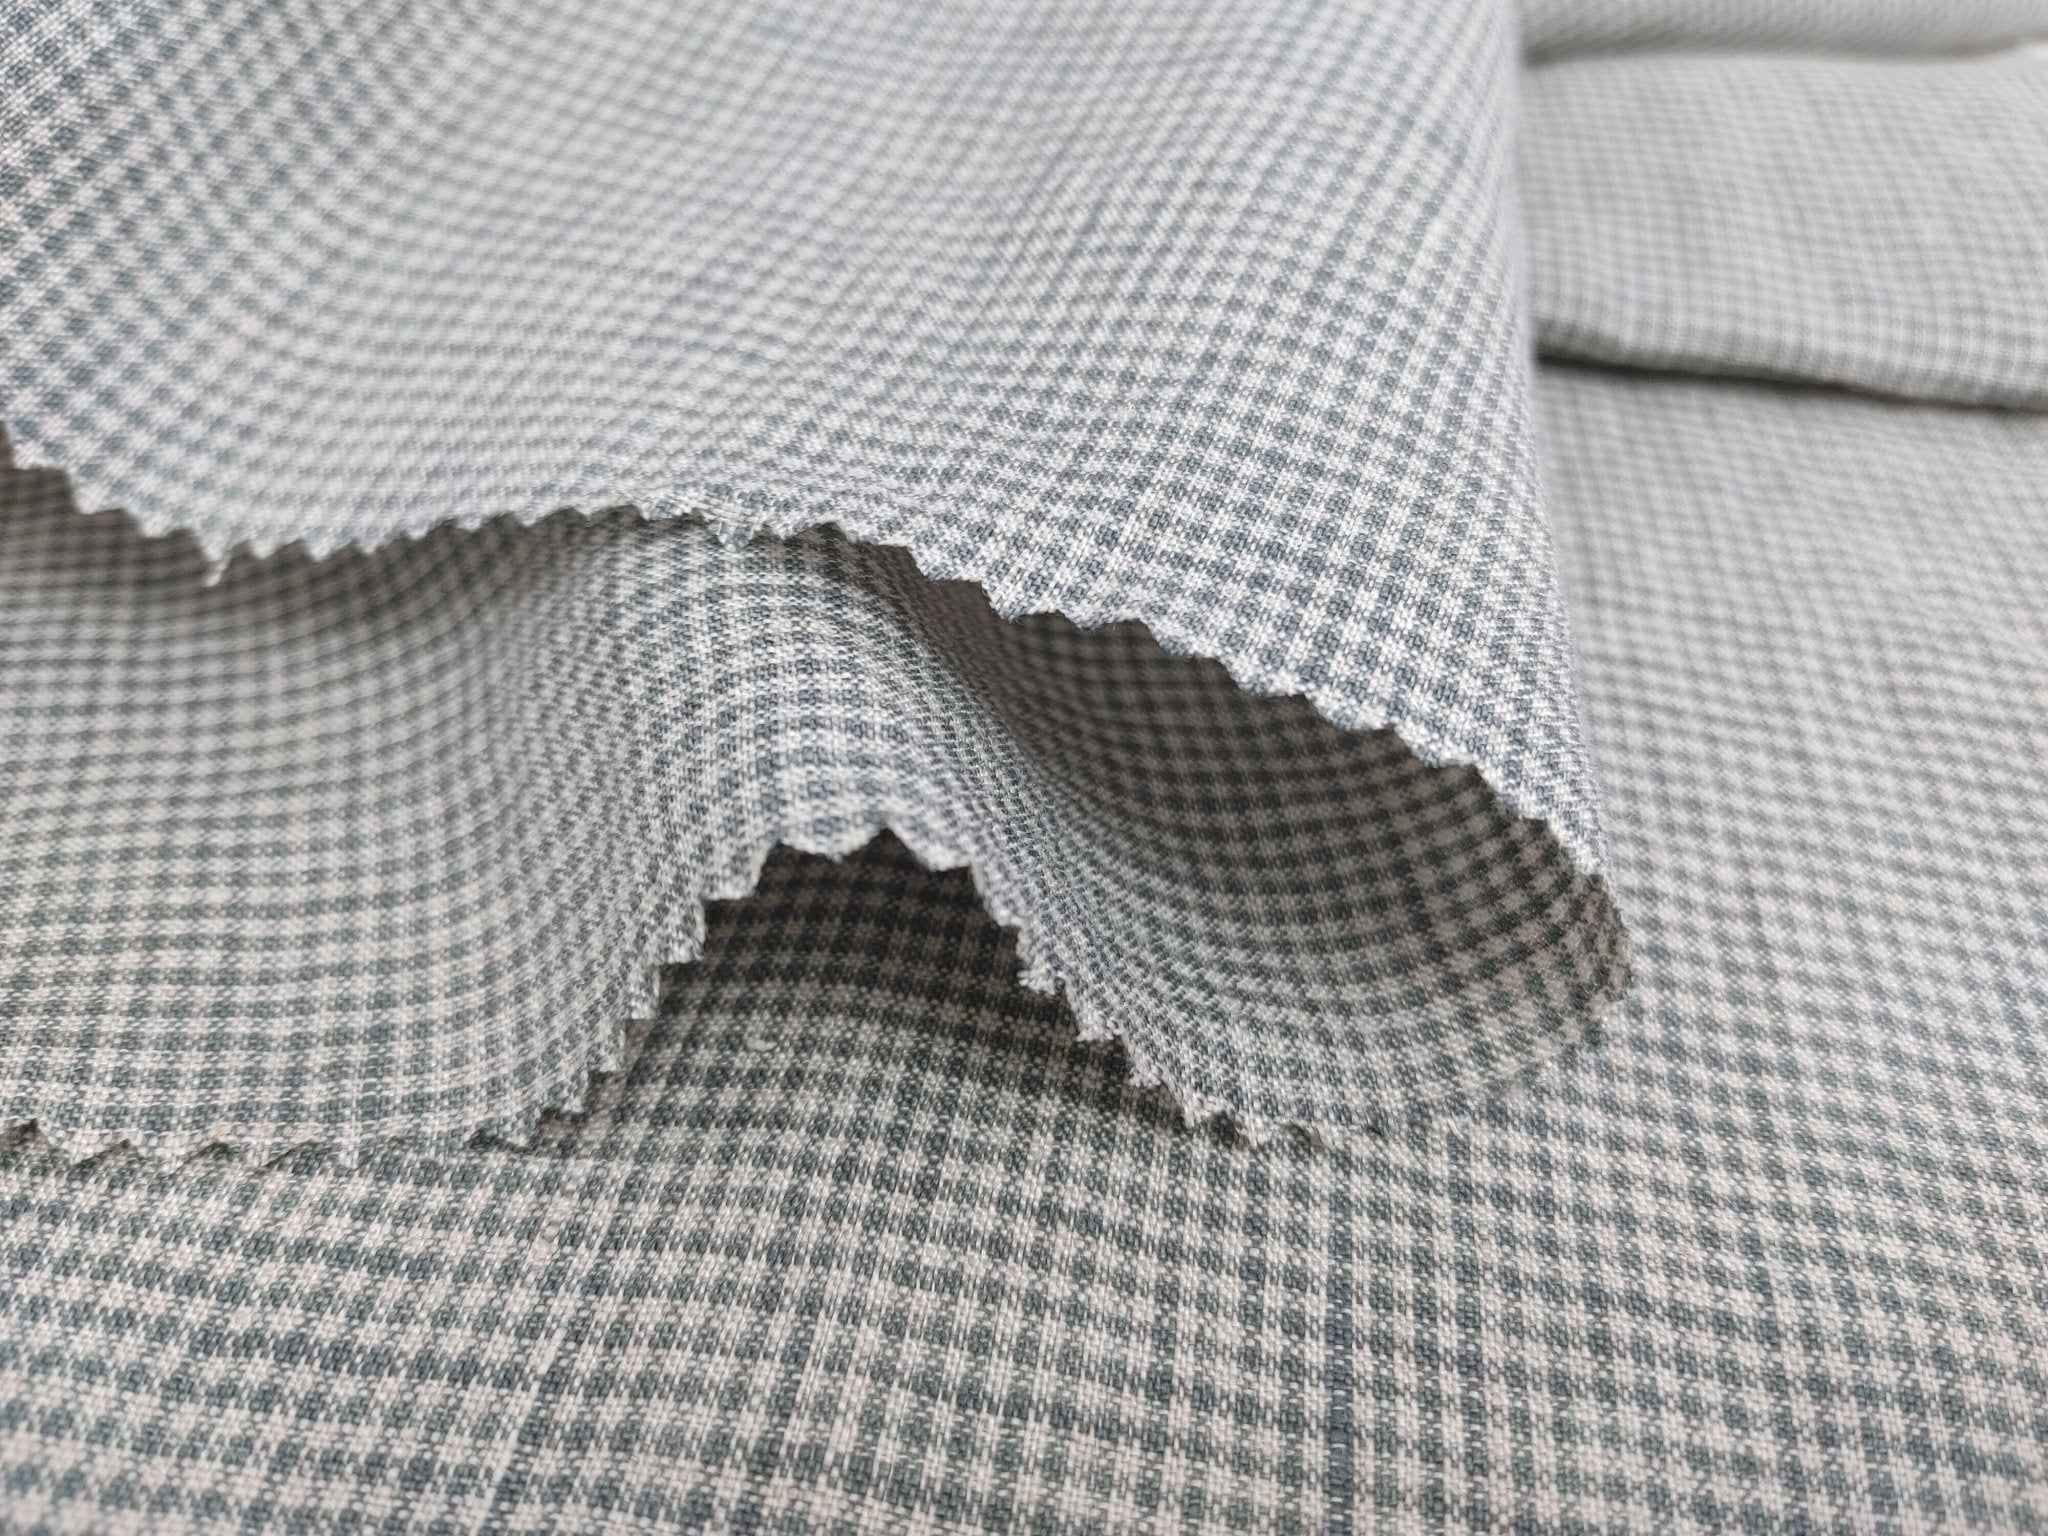 Classic Charm: 100% Linen Mini Gingham Check Fabric, Light Weight 6833 - The Linen Lab - Green